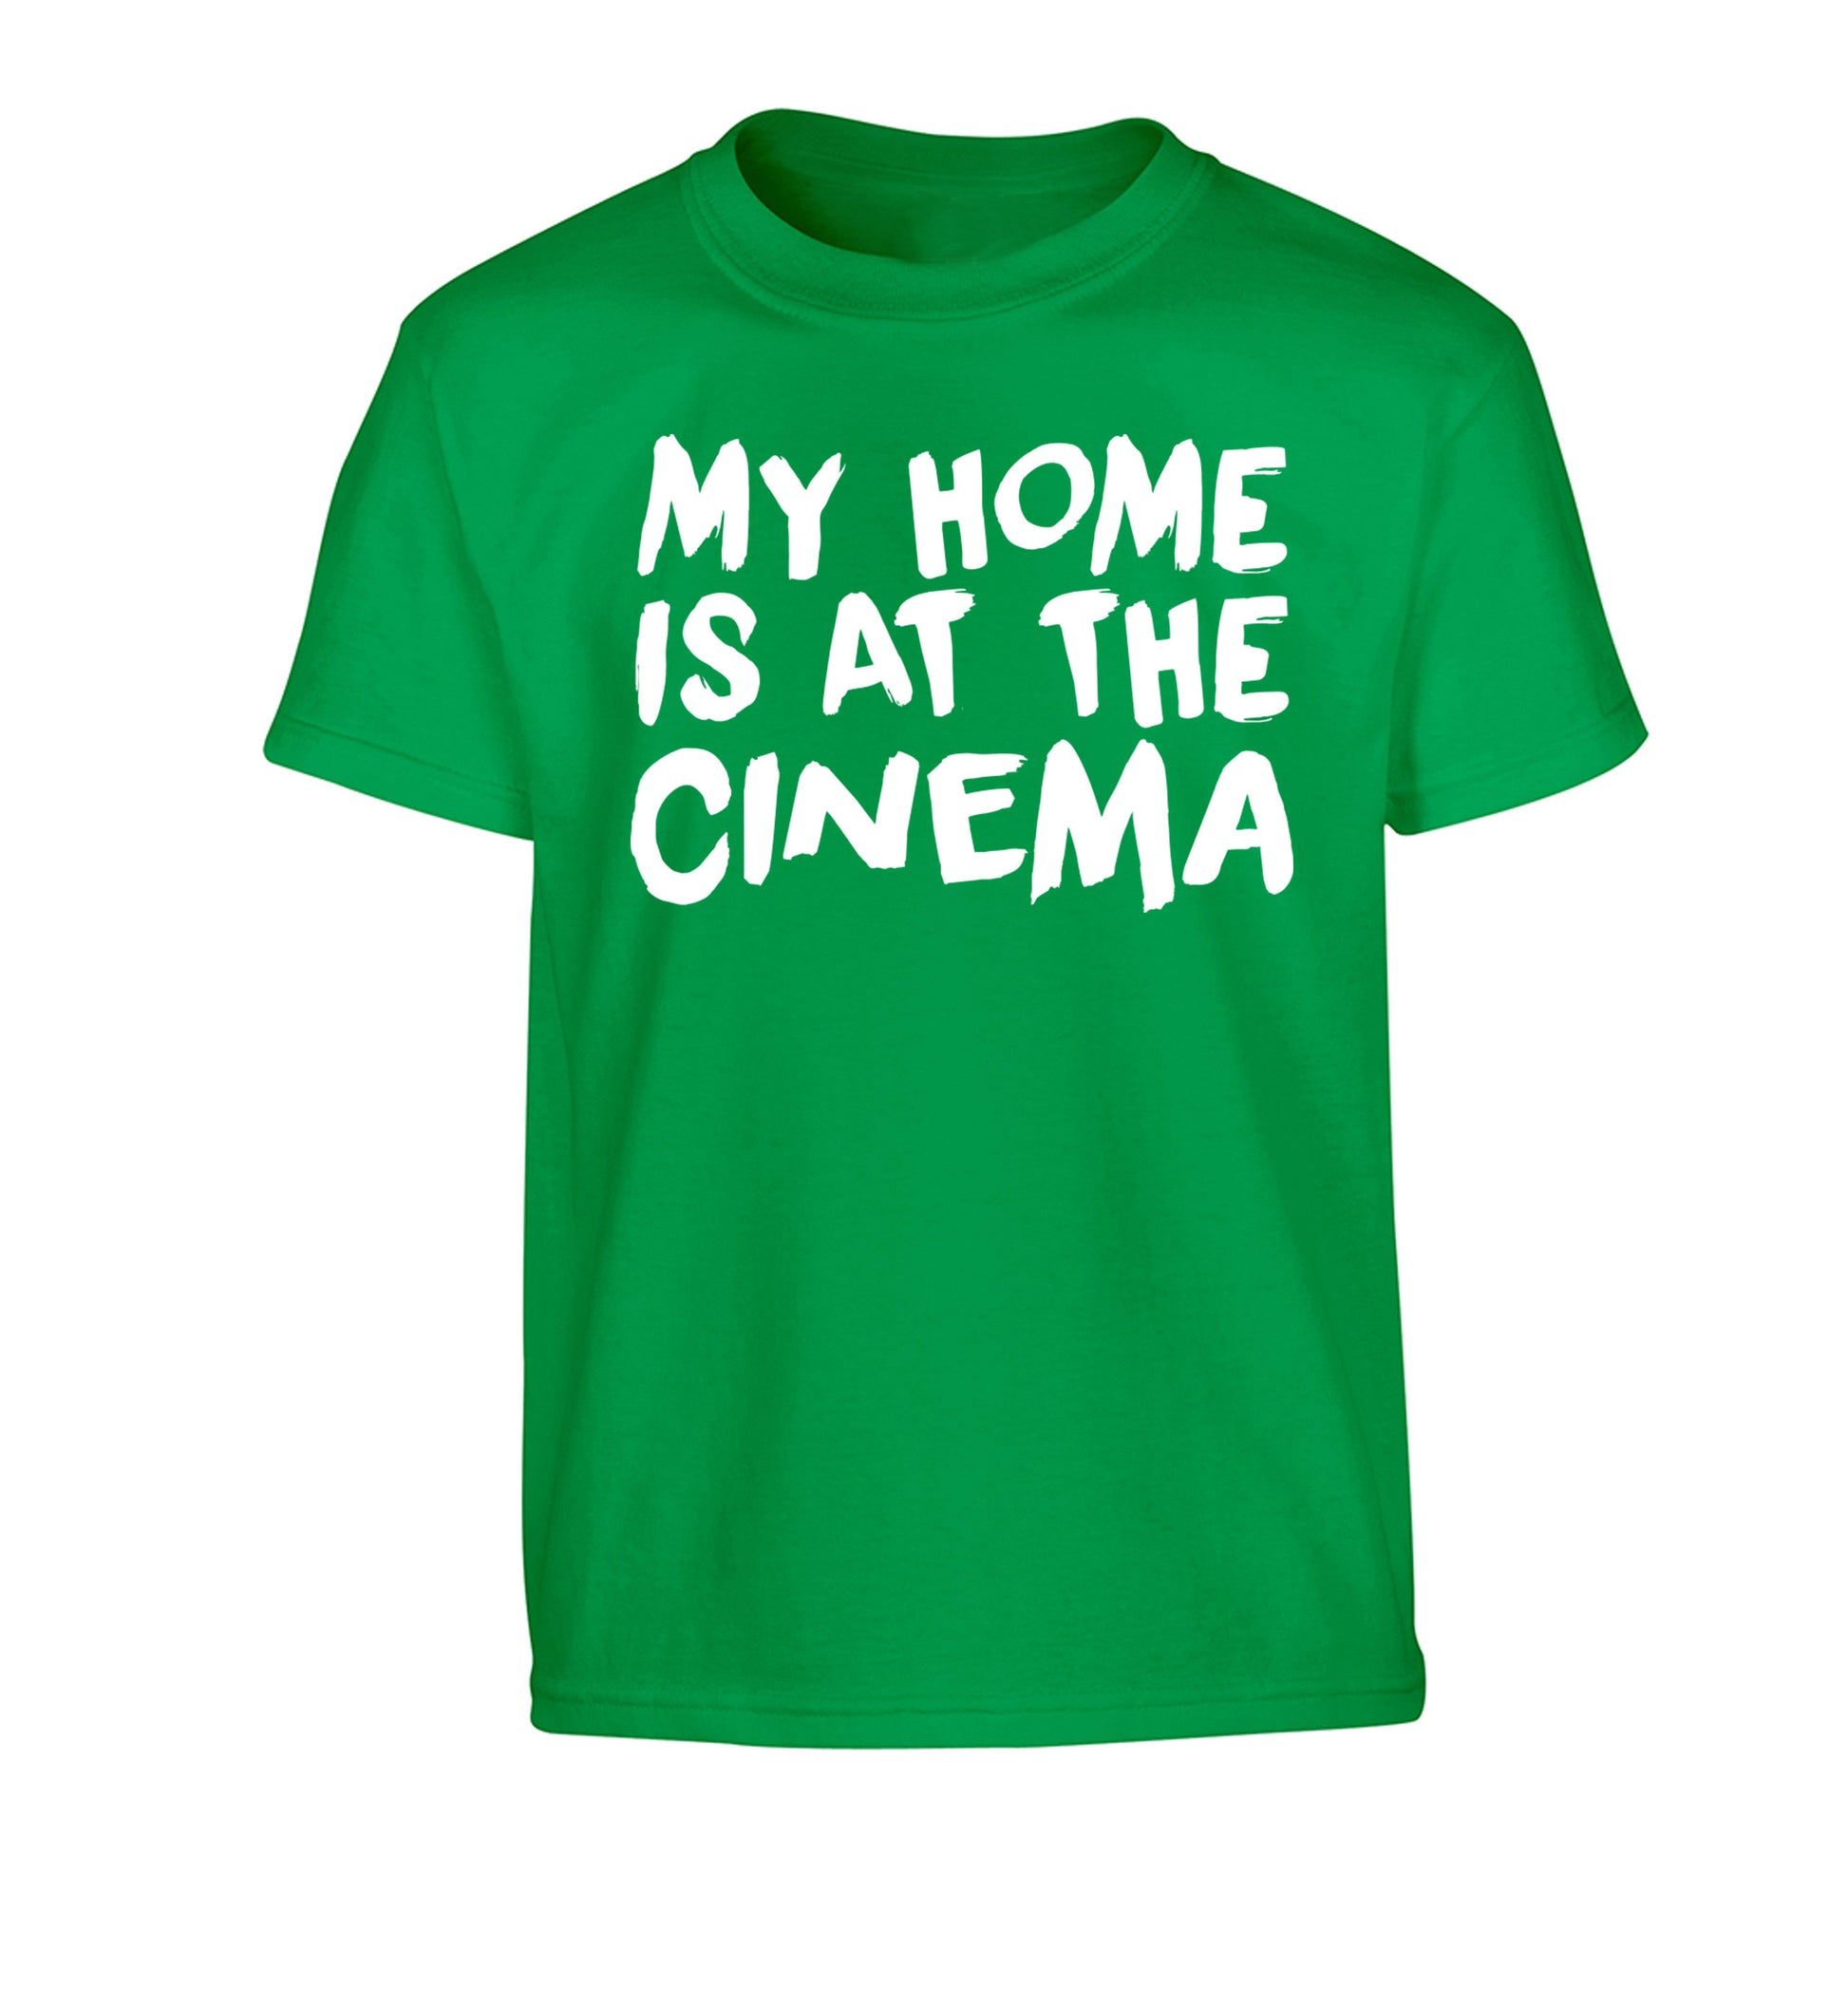 My home is at the cinema Children's green Tshirt 12-14 Years